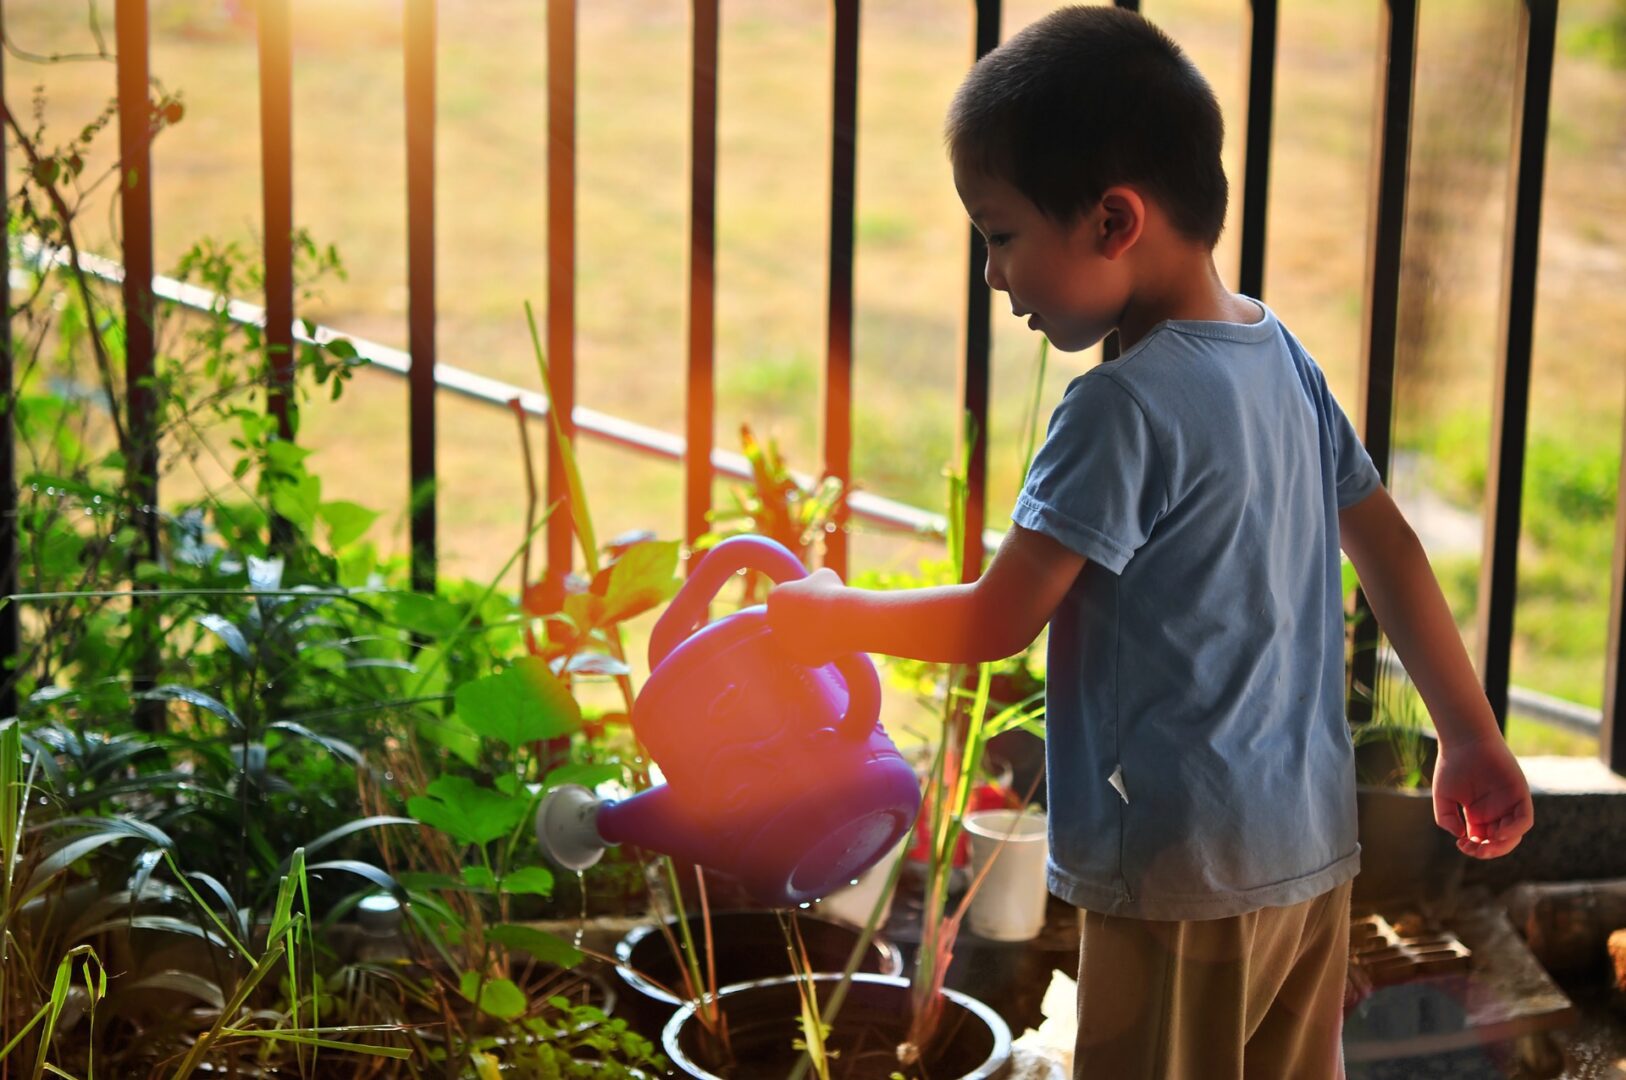 A young boy watering plants in a garden.